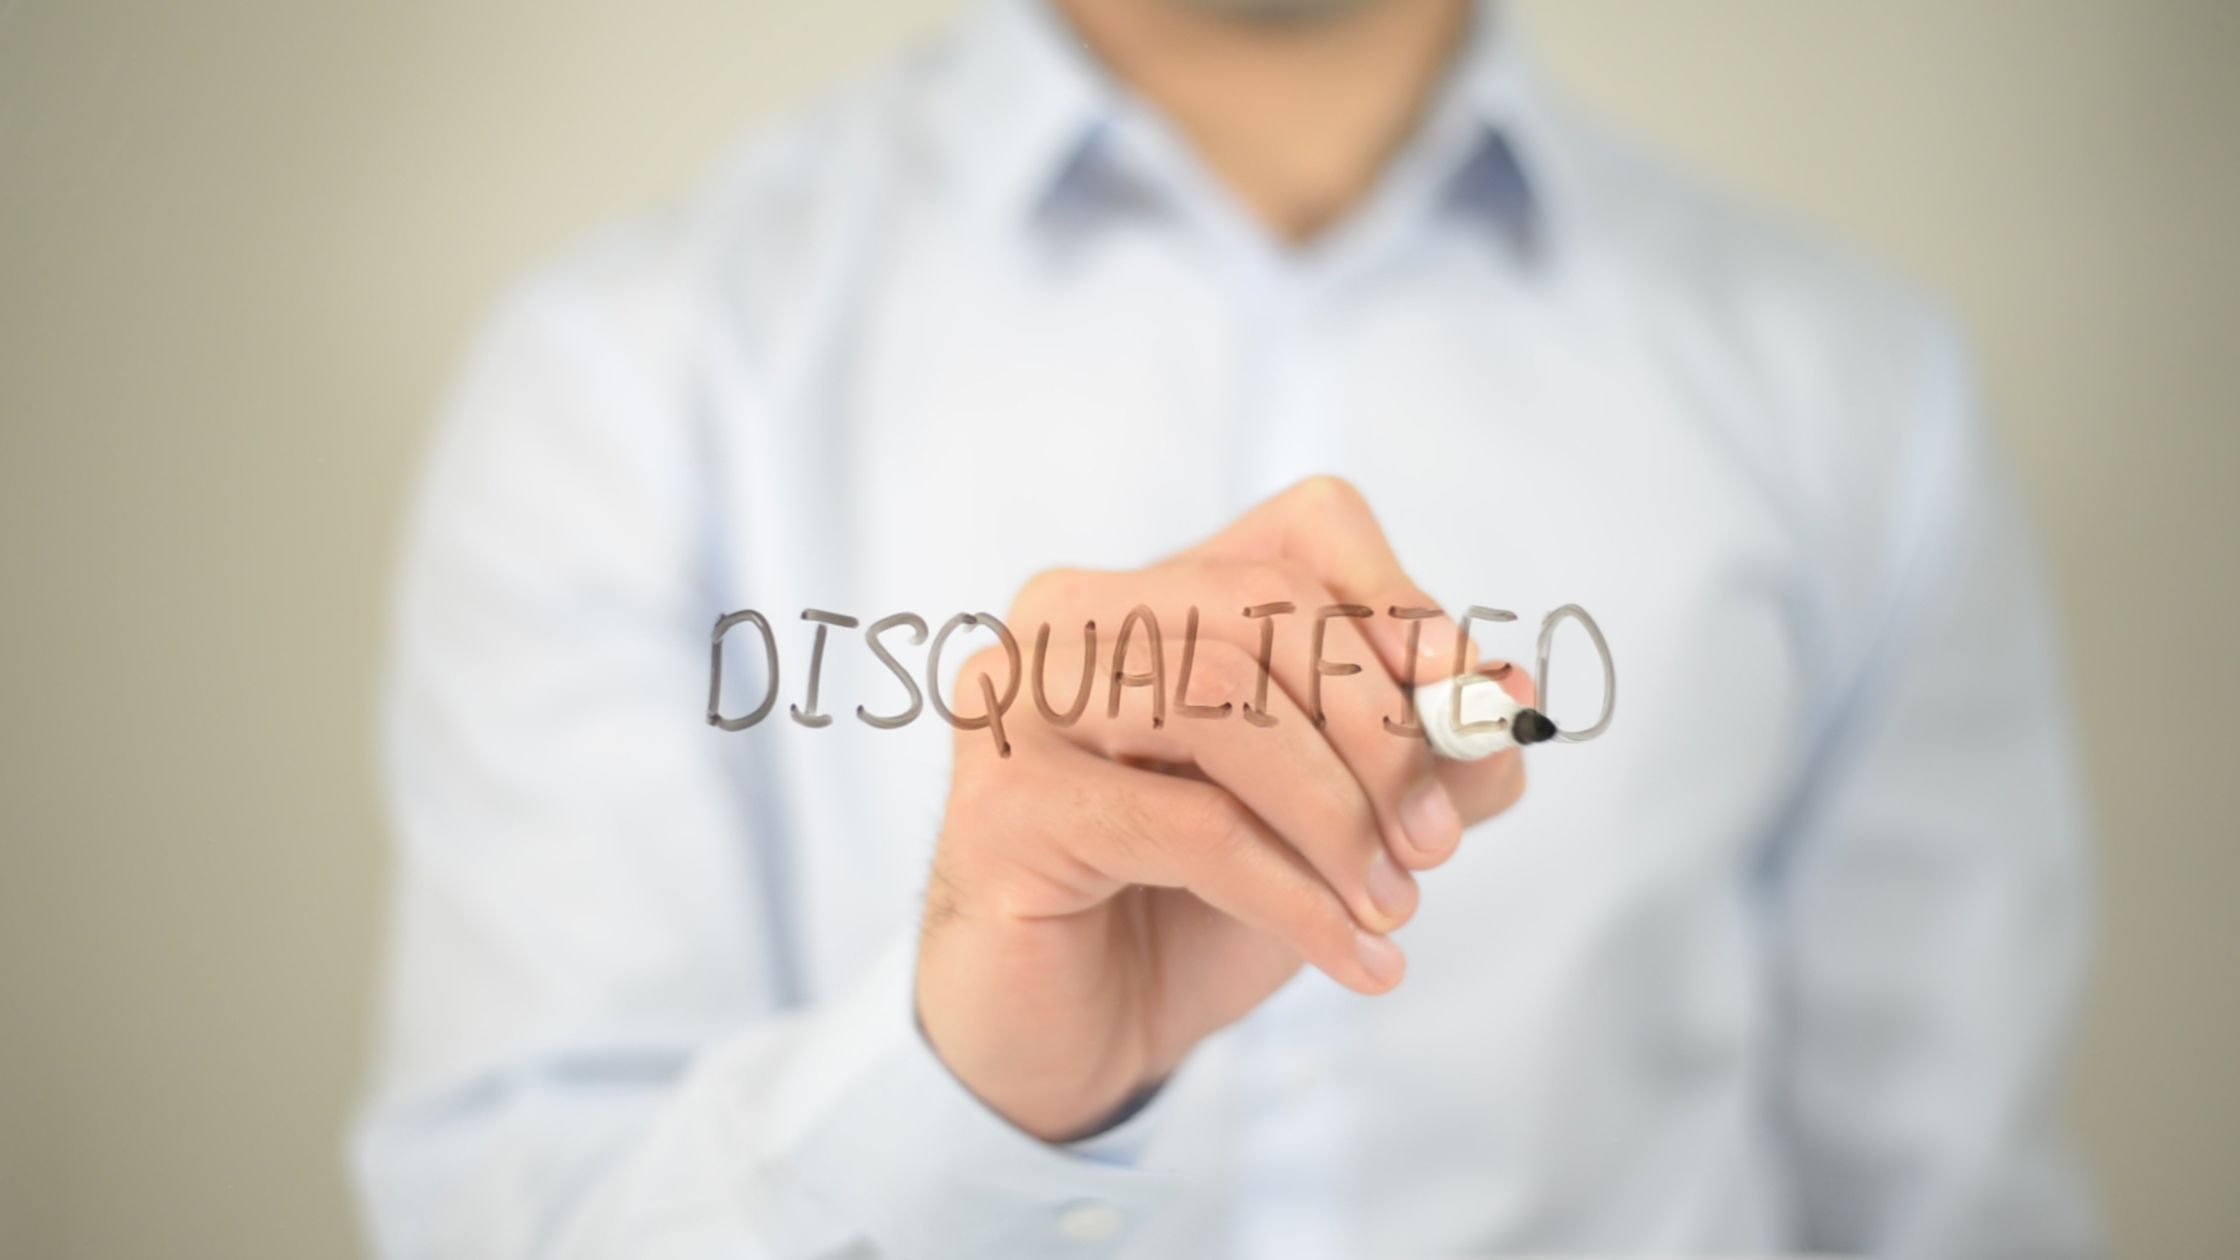 Man in a collared shirt writing the word "disqualified" on a mirror with black marker